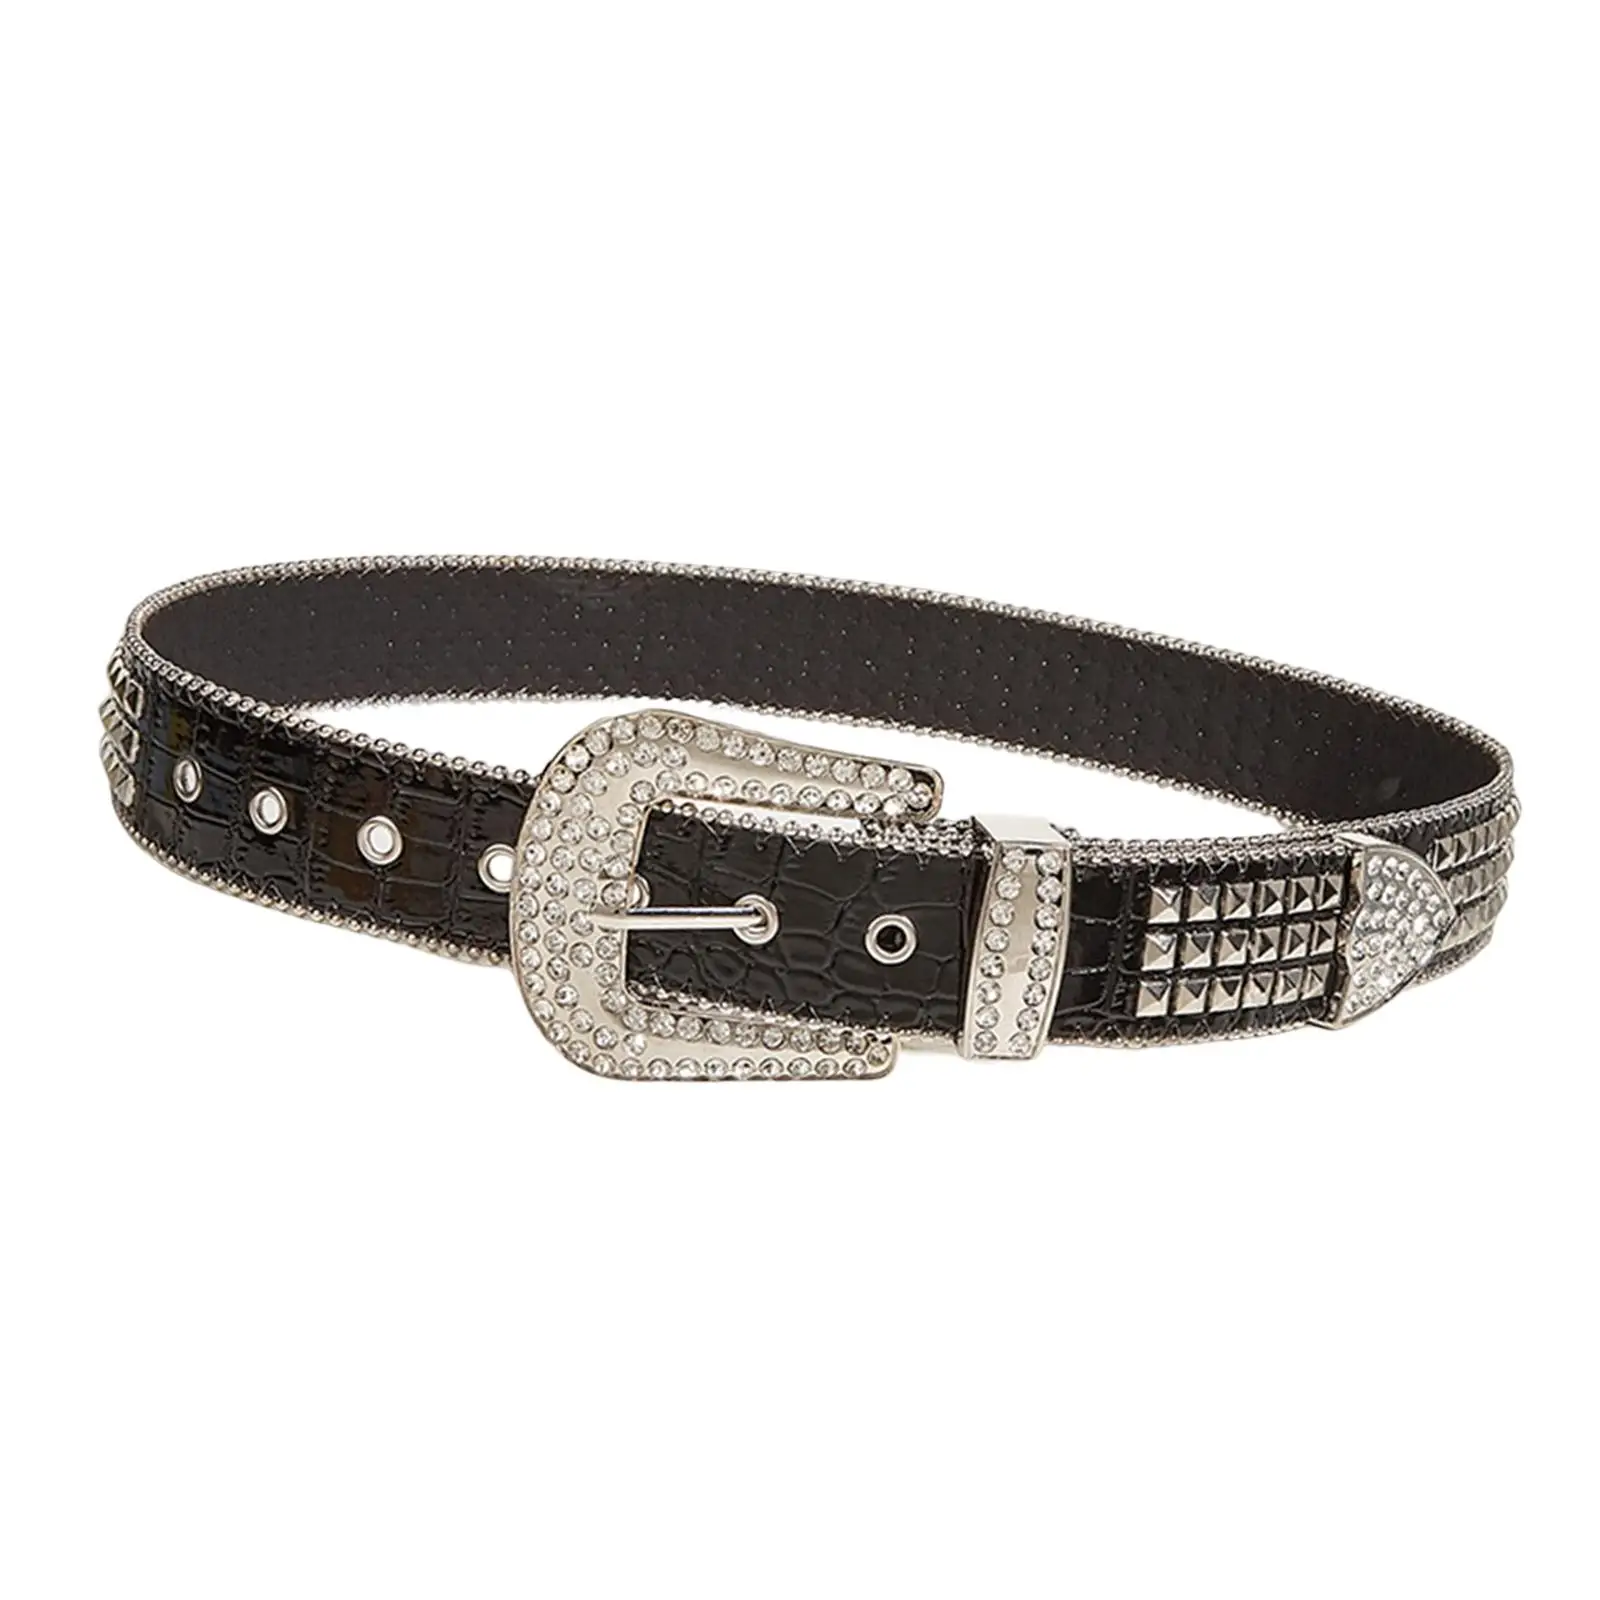 Ladies Women Rhinestone Belt Western Bling Wide PU Leather Studded for Motorcycle